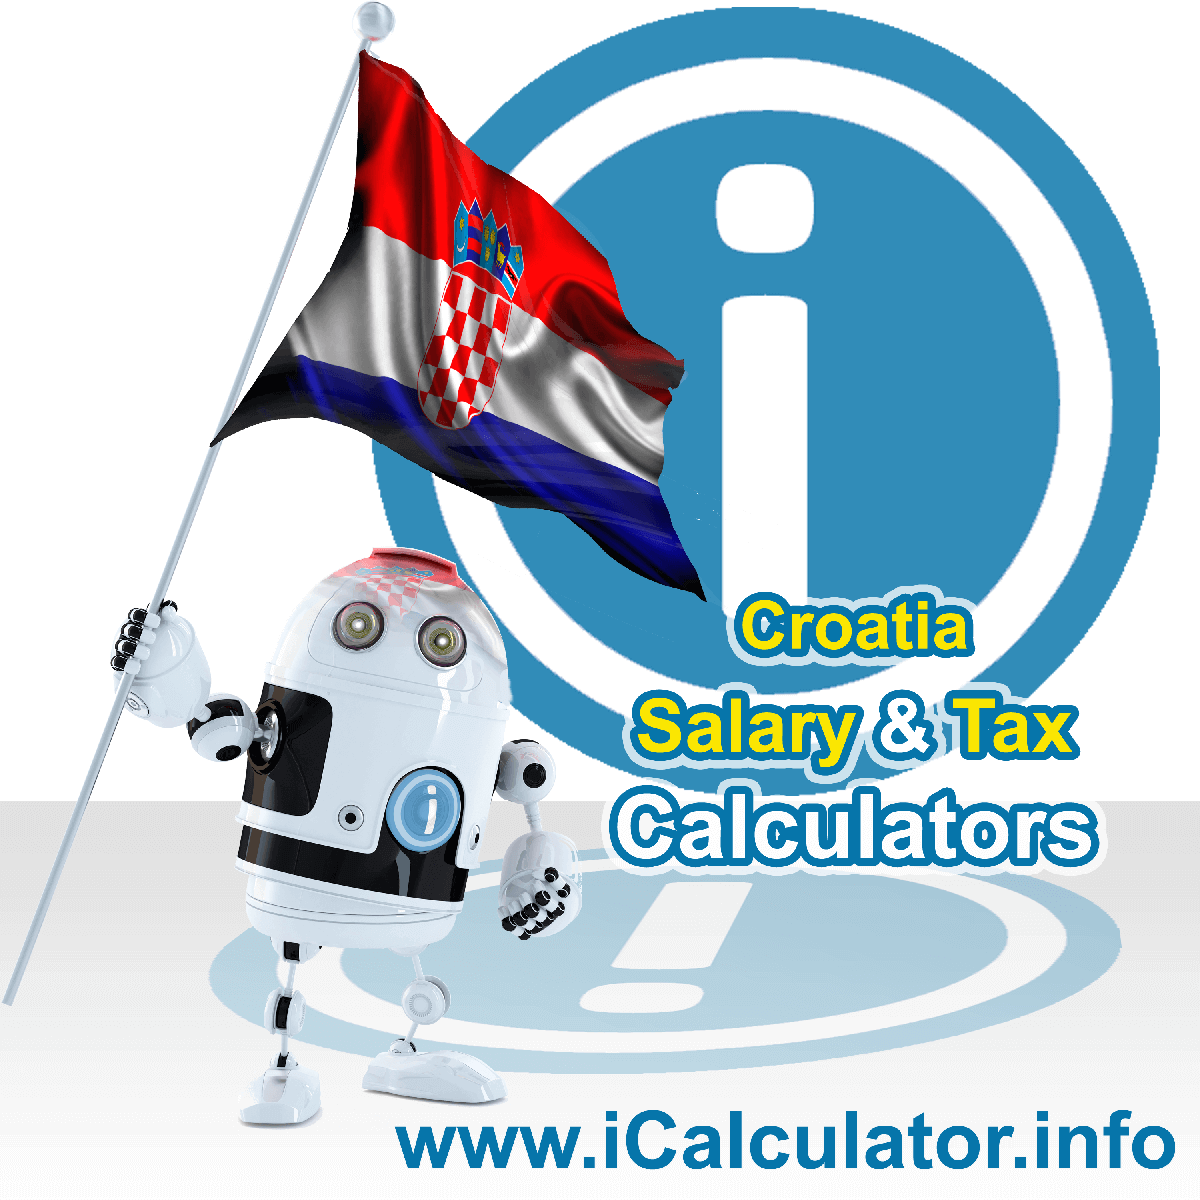 Croatia Tax Calculator. This image shows the Croatia flag and information relating to the tax formula for the Croatia Salary Calculator